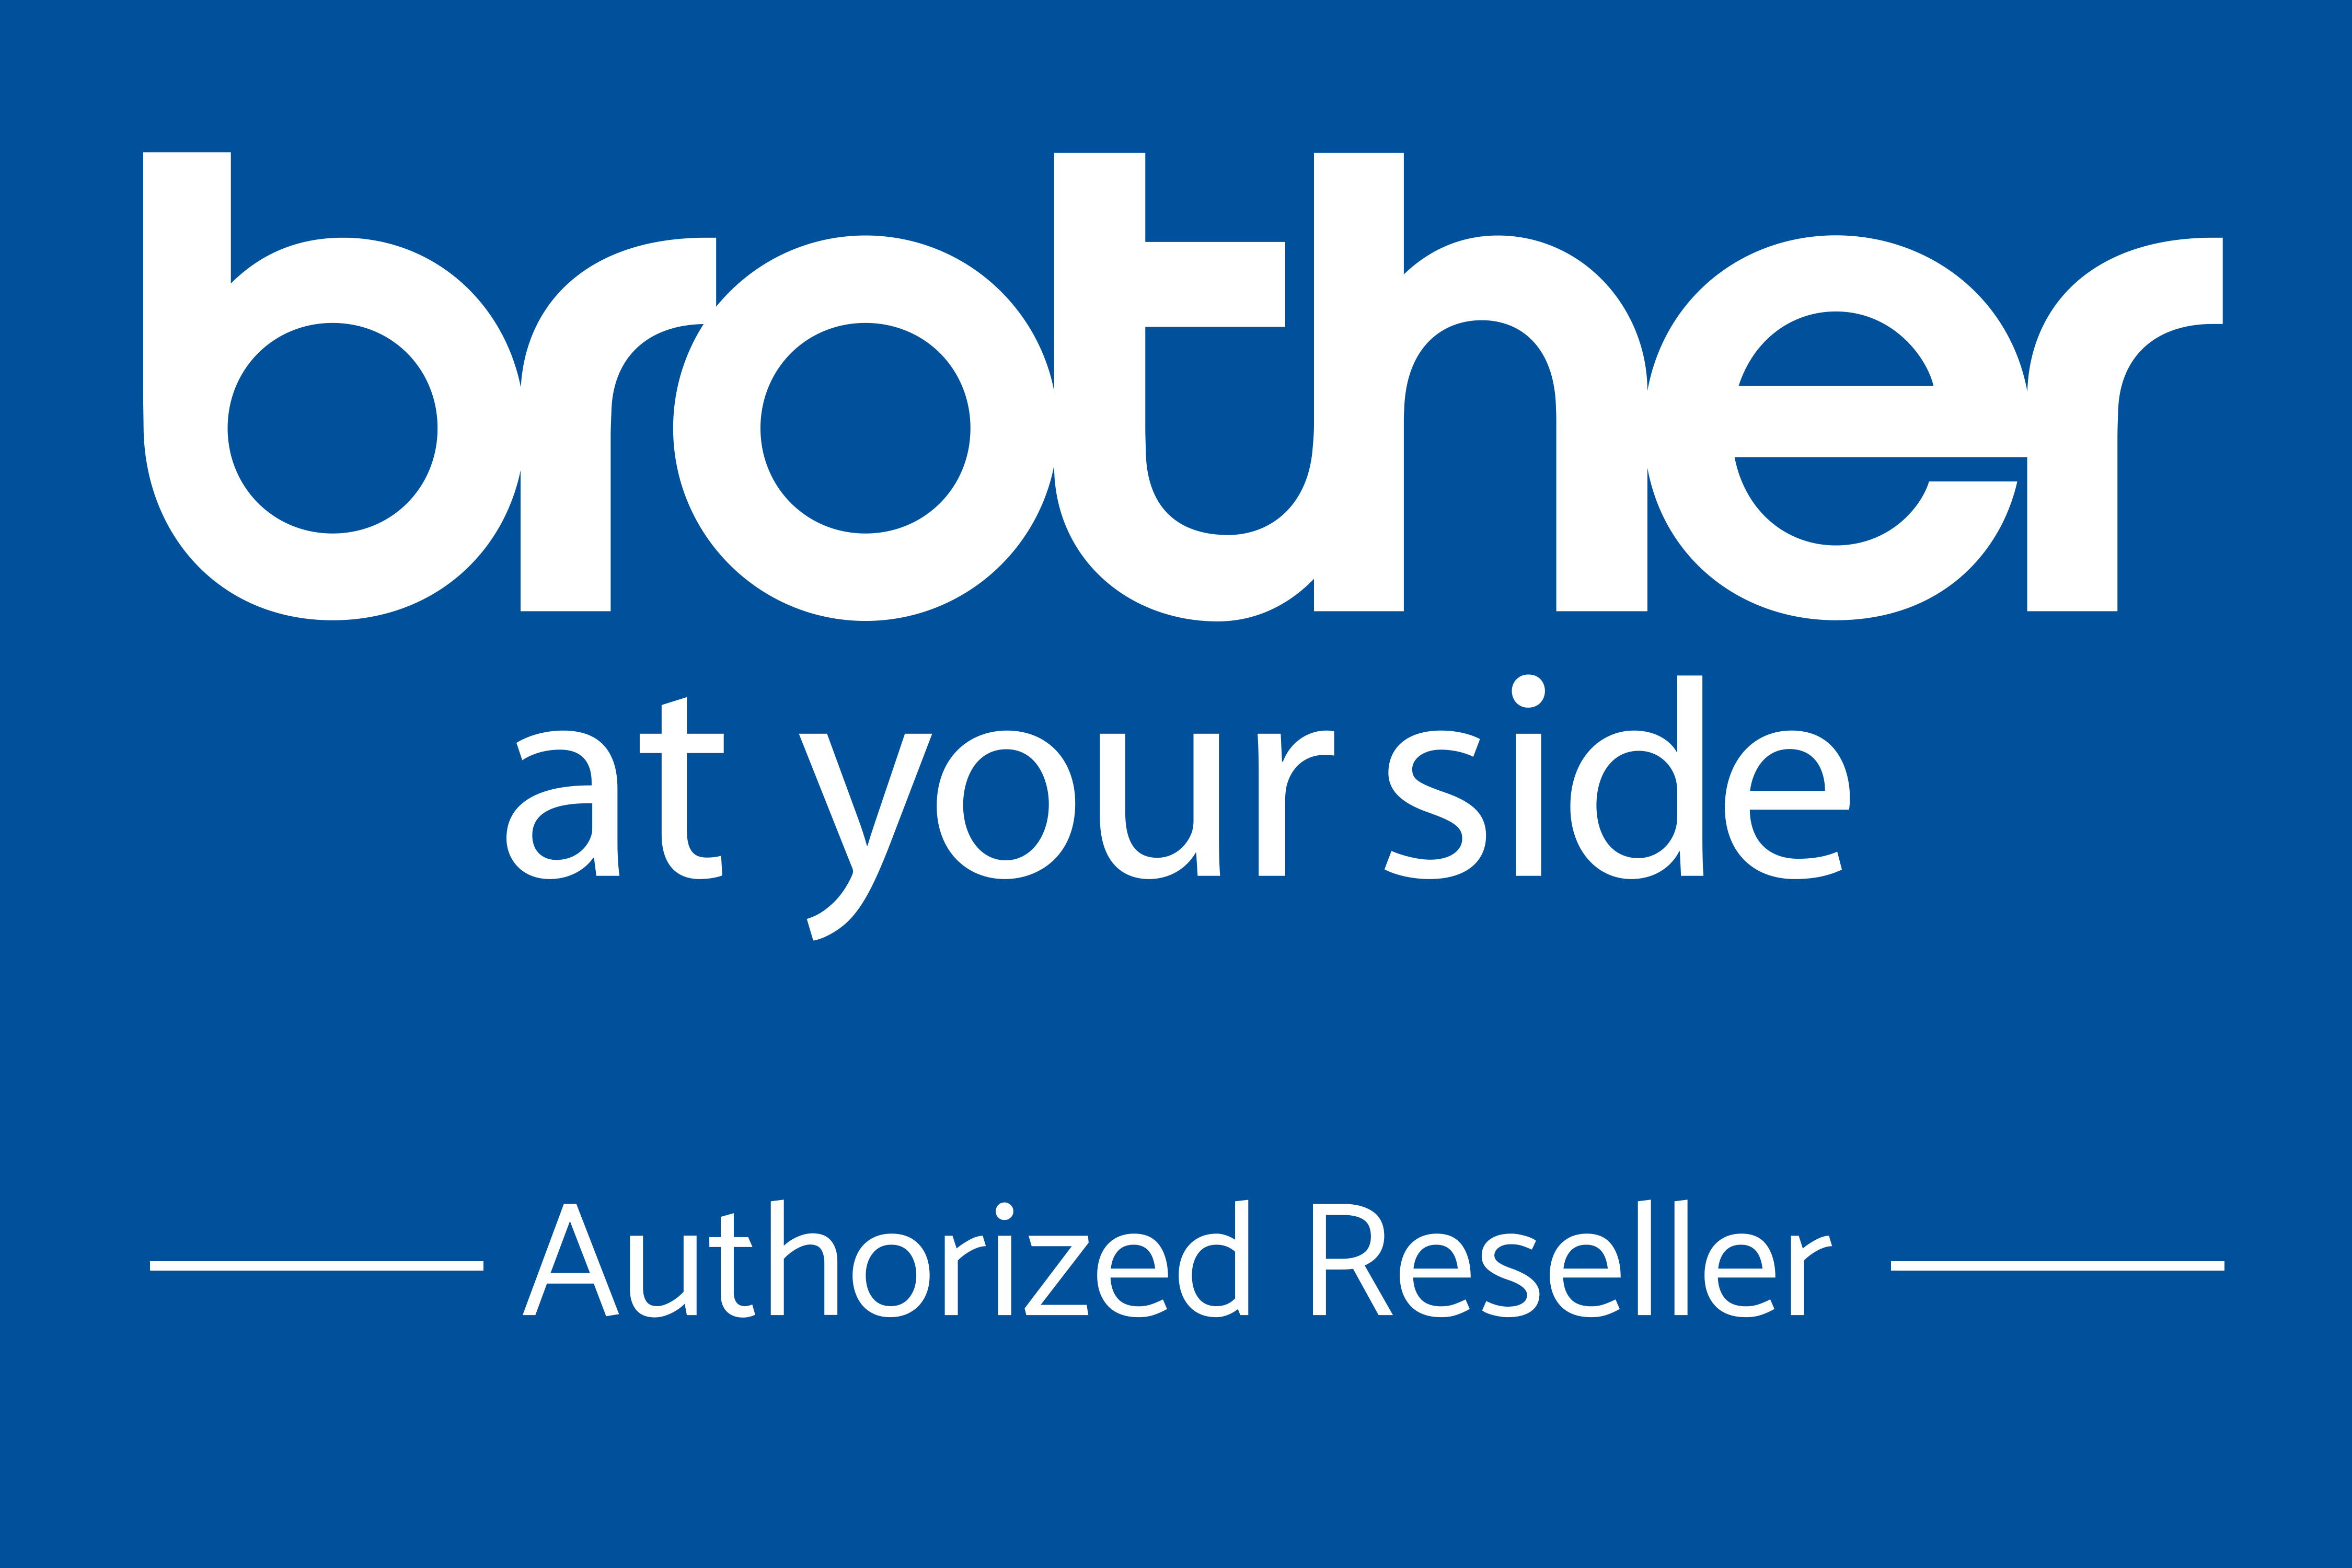 Brother Authorized Reseller